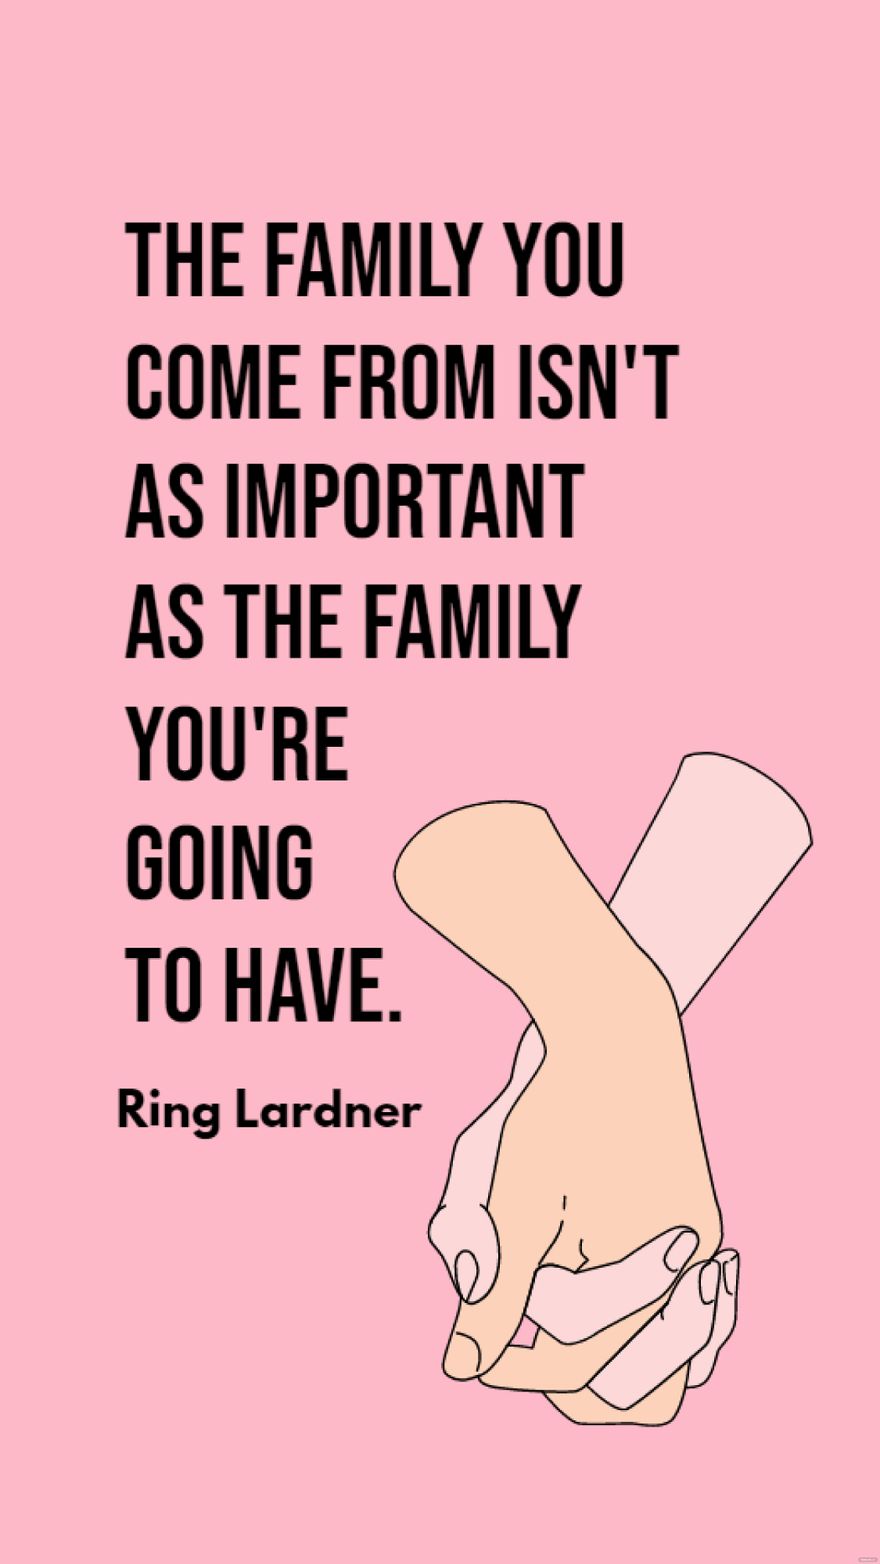 Ring Lardner - The family you come from isn't as important as the family you're going to have.